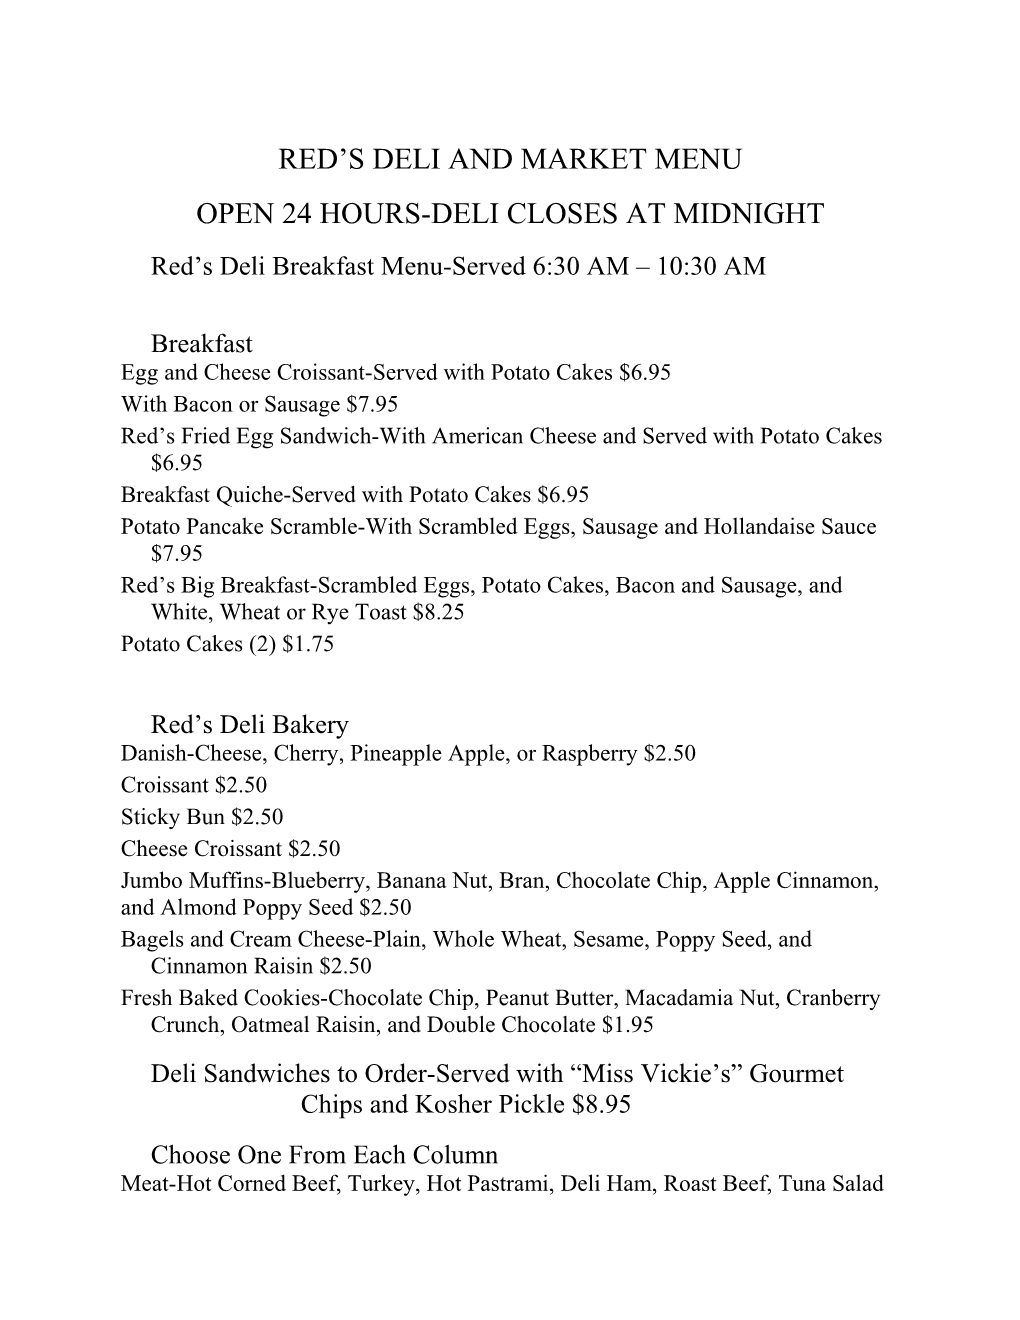 Open 24 Hours-Deli Closes at Midnight